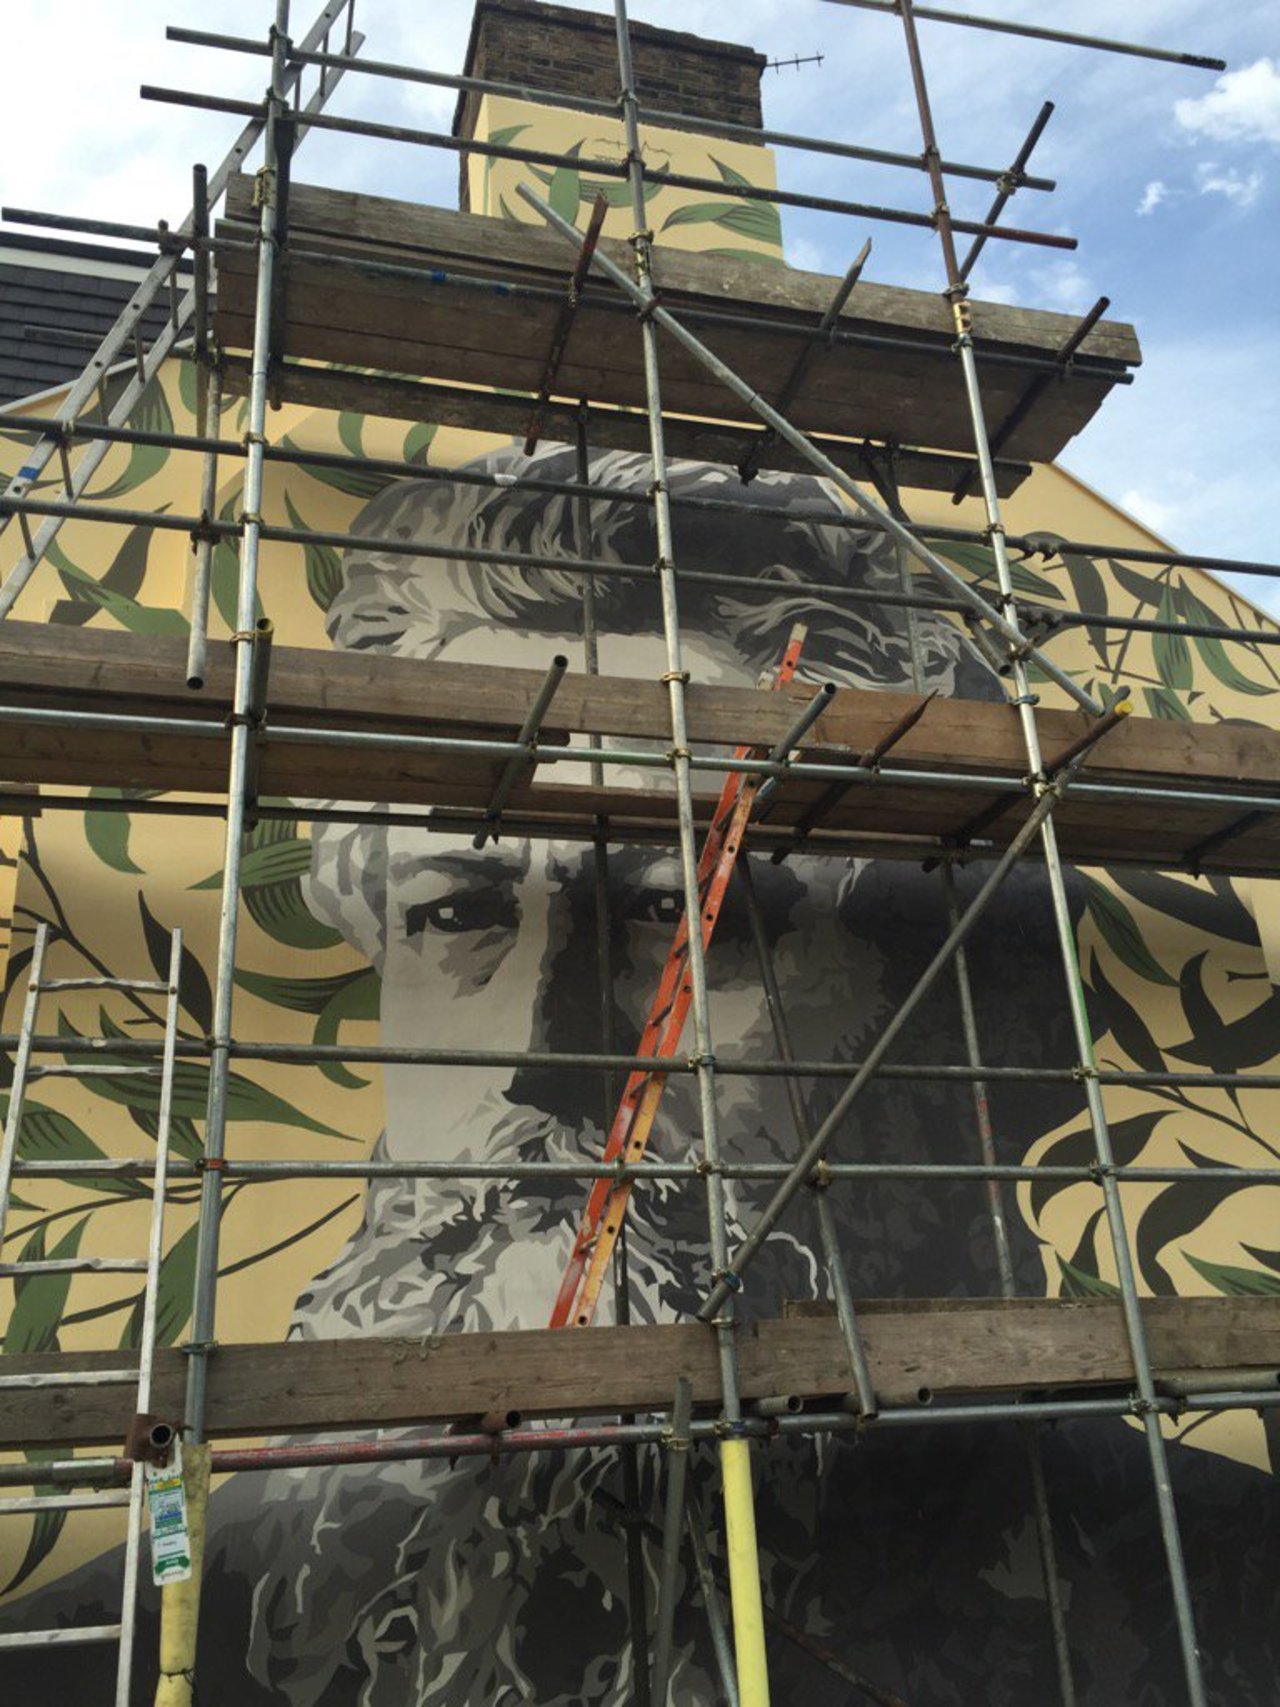 Oh, brand spanking new wall art celebrating William Morris almost finished! #streetart @woodstreetwalls #e17 https://t.co/T8hdmlcp2k